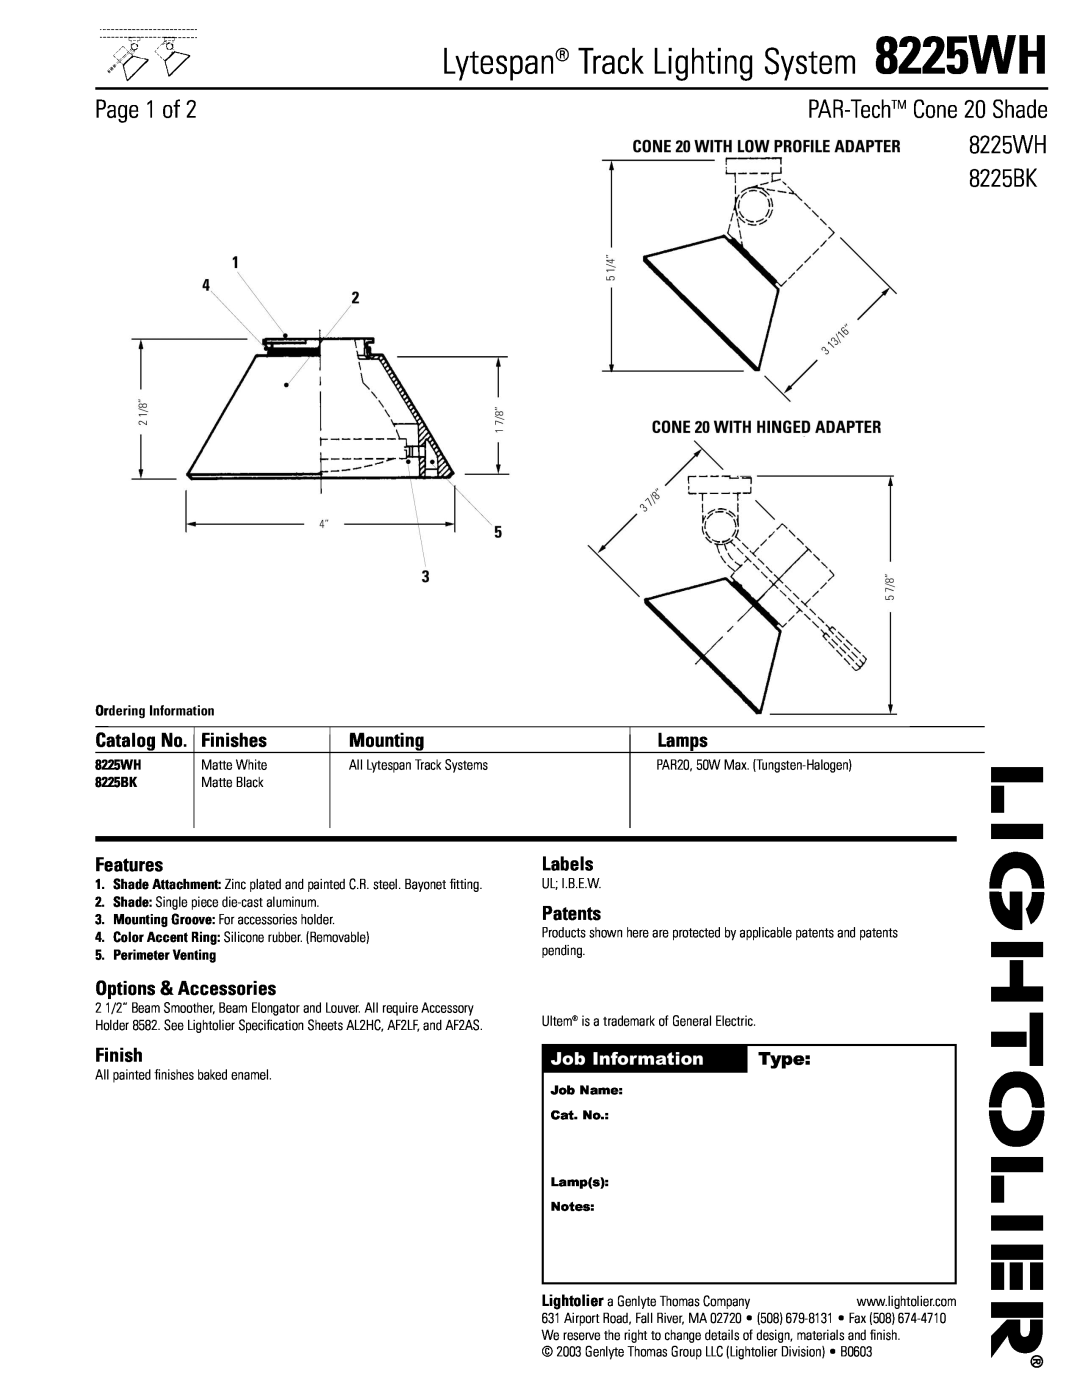 Lightolier 8225WH specifications Page 1 of, PAR-TechTM Cone 20 Shade, Finishes, Mounting, Lamps, Features, Labels, Patents 